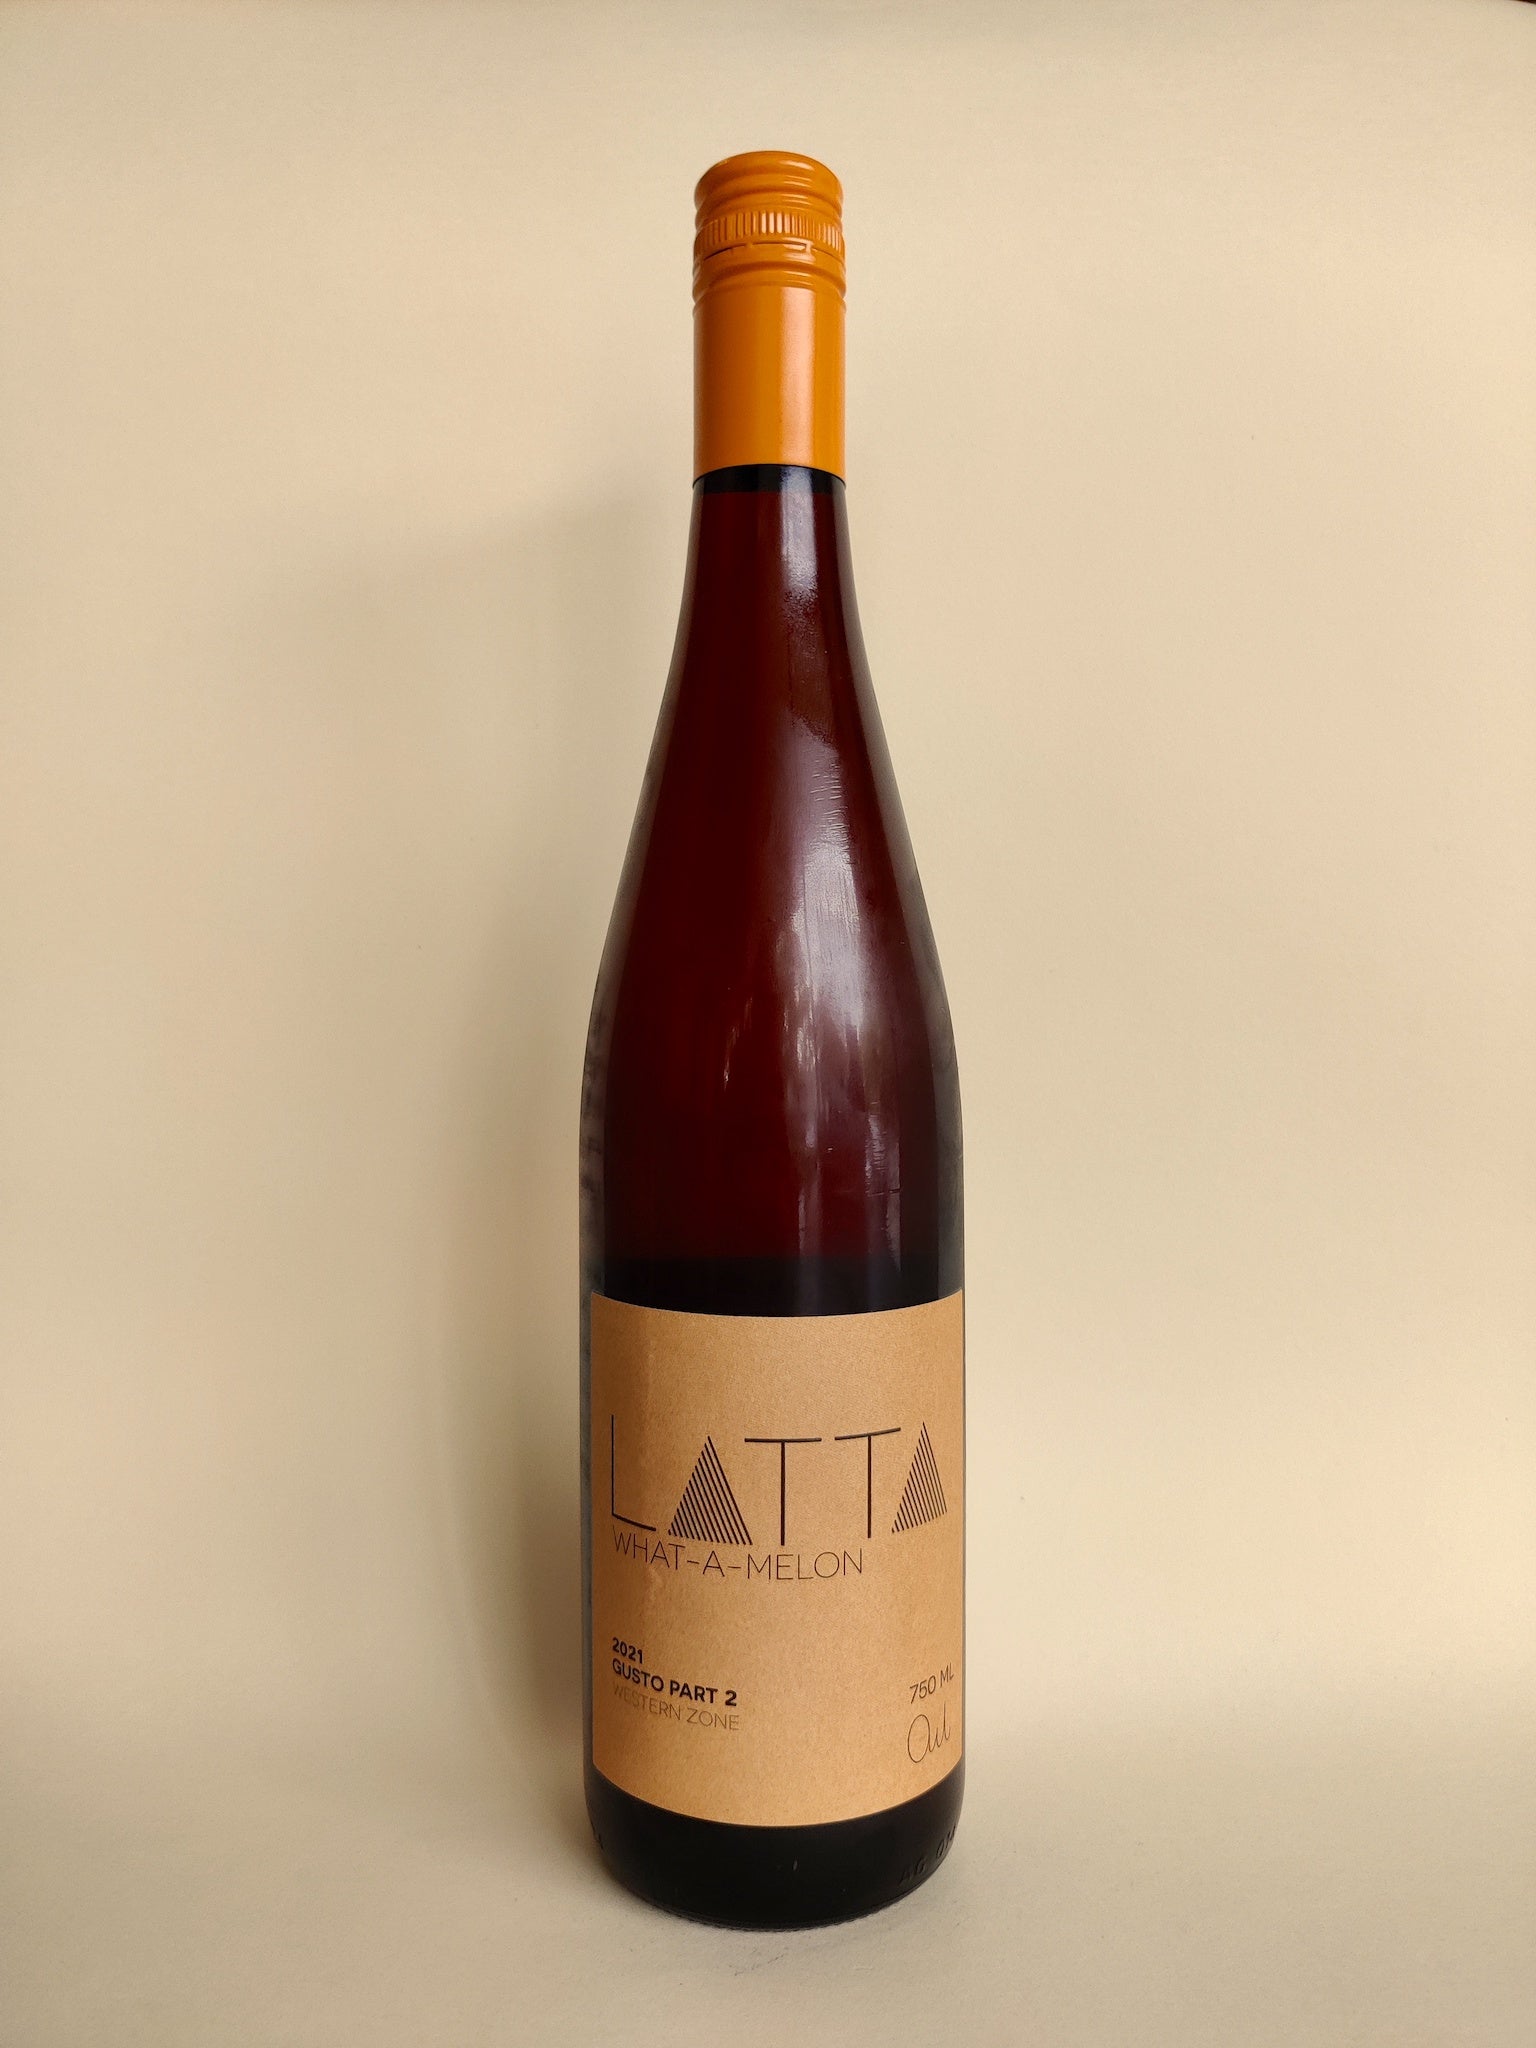 A bottle of Latta What-a-Melon Rosé from the Pyrenees, Victoria. 